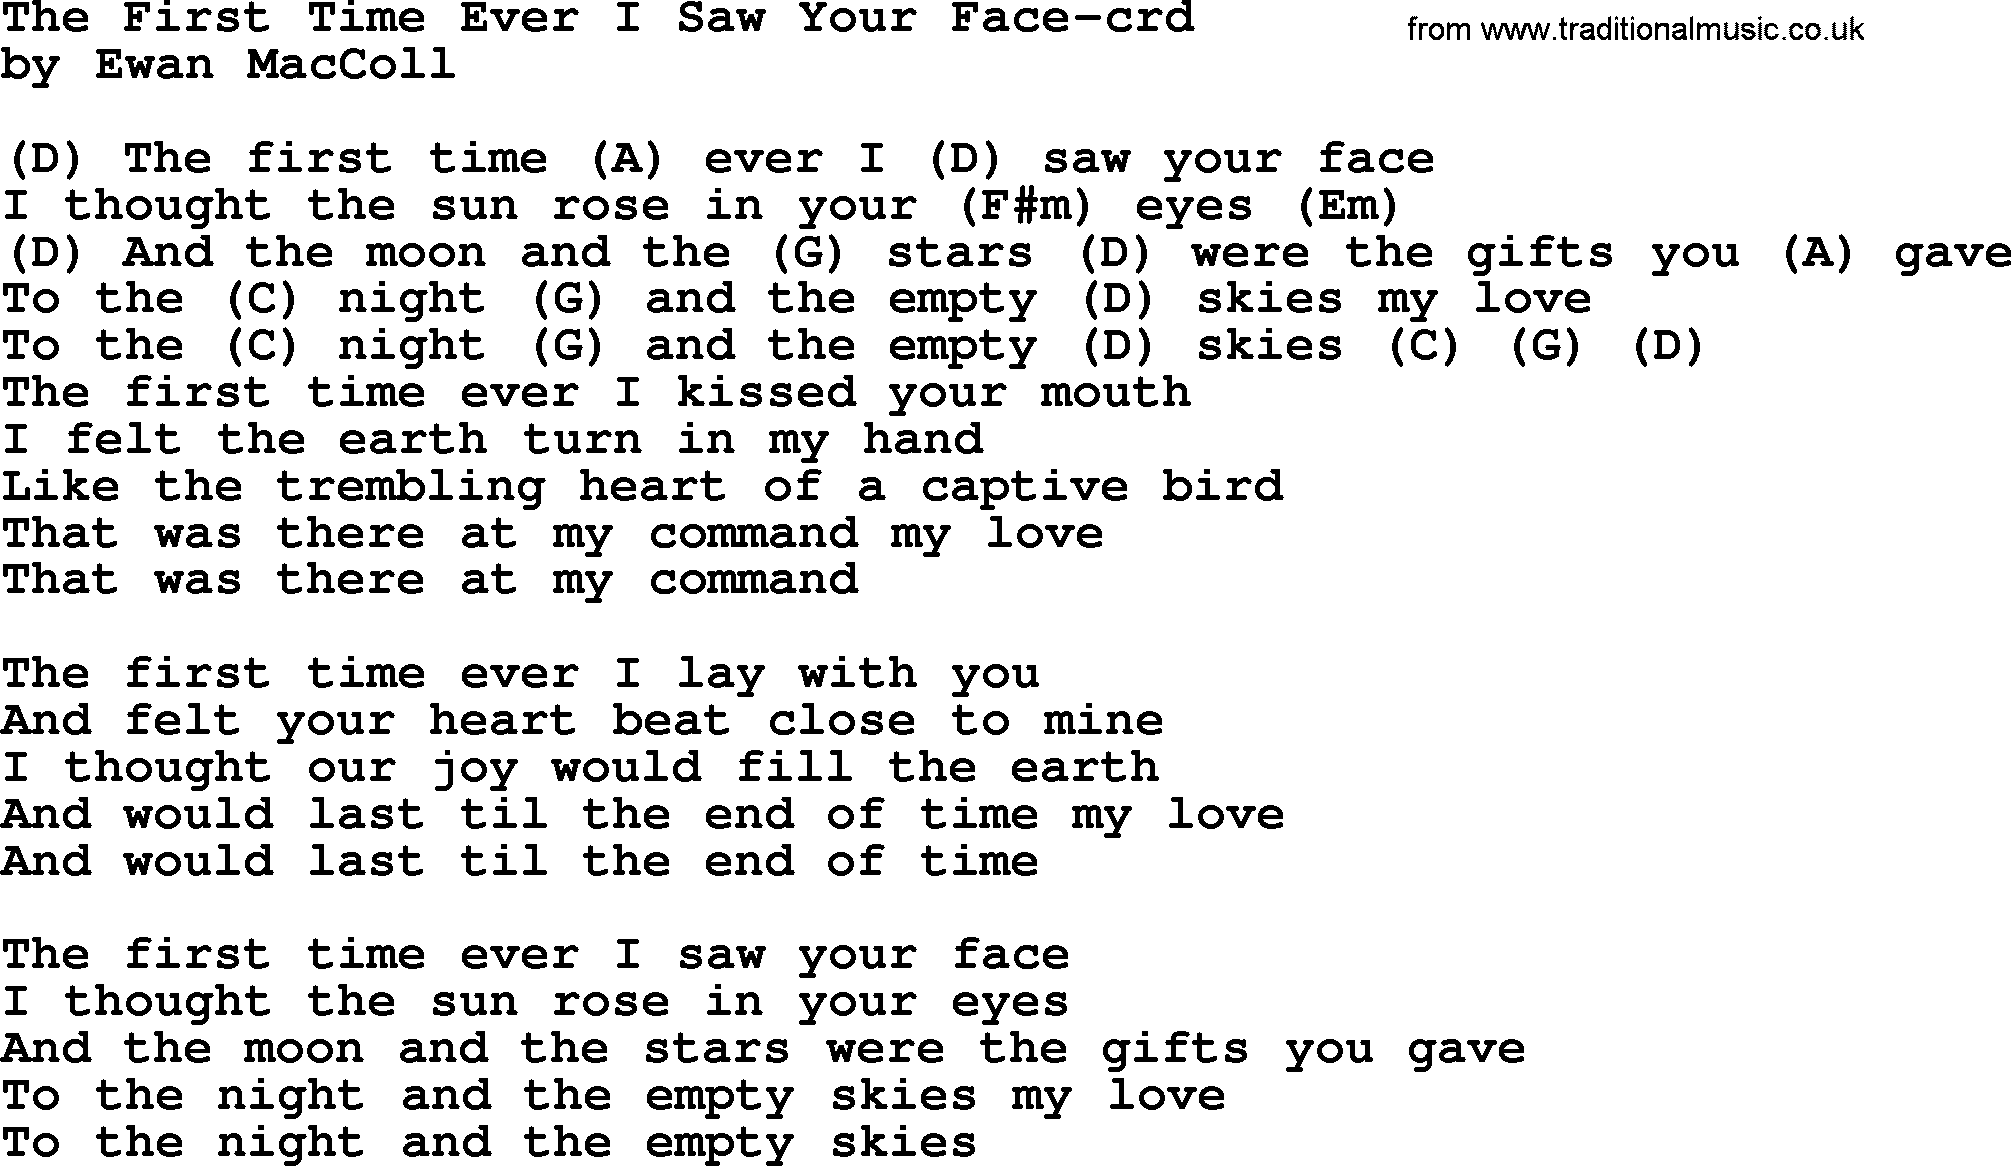 Gordon Lightfoot song The First Time Ever I Saw Your Face, lyrics and chords